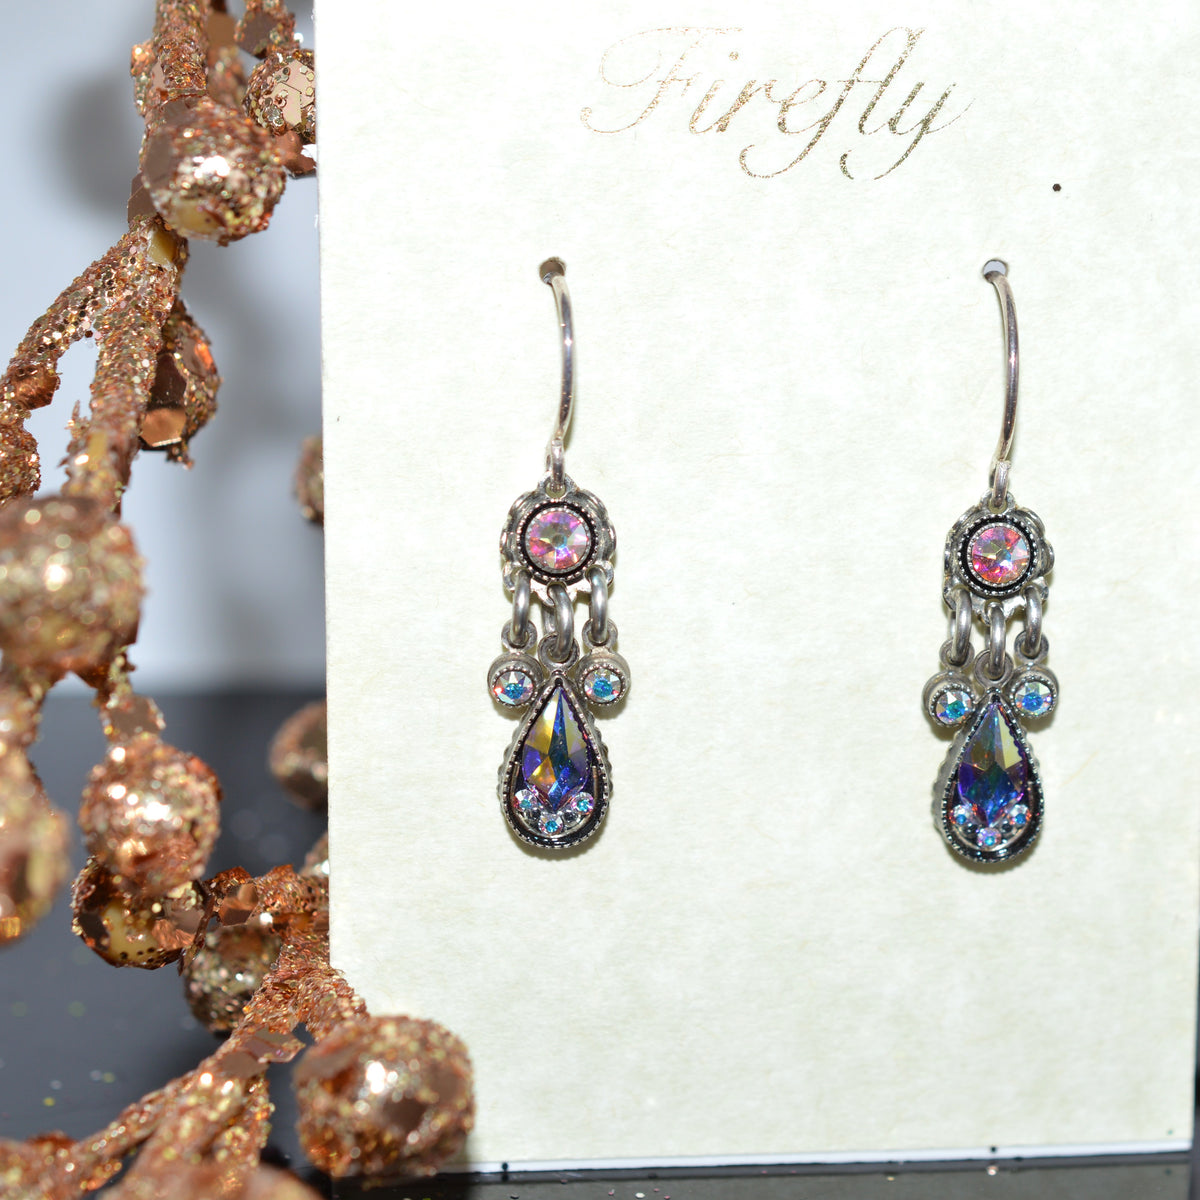 Antique Silver Plated Crystal Earrings by Firefly